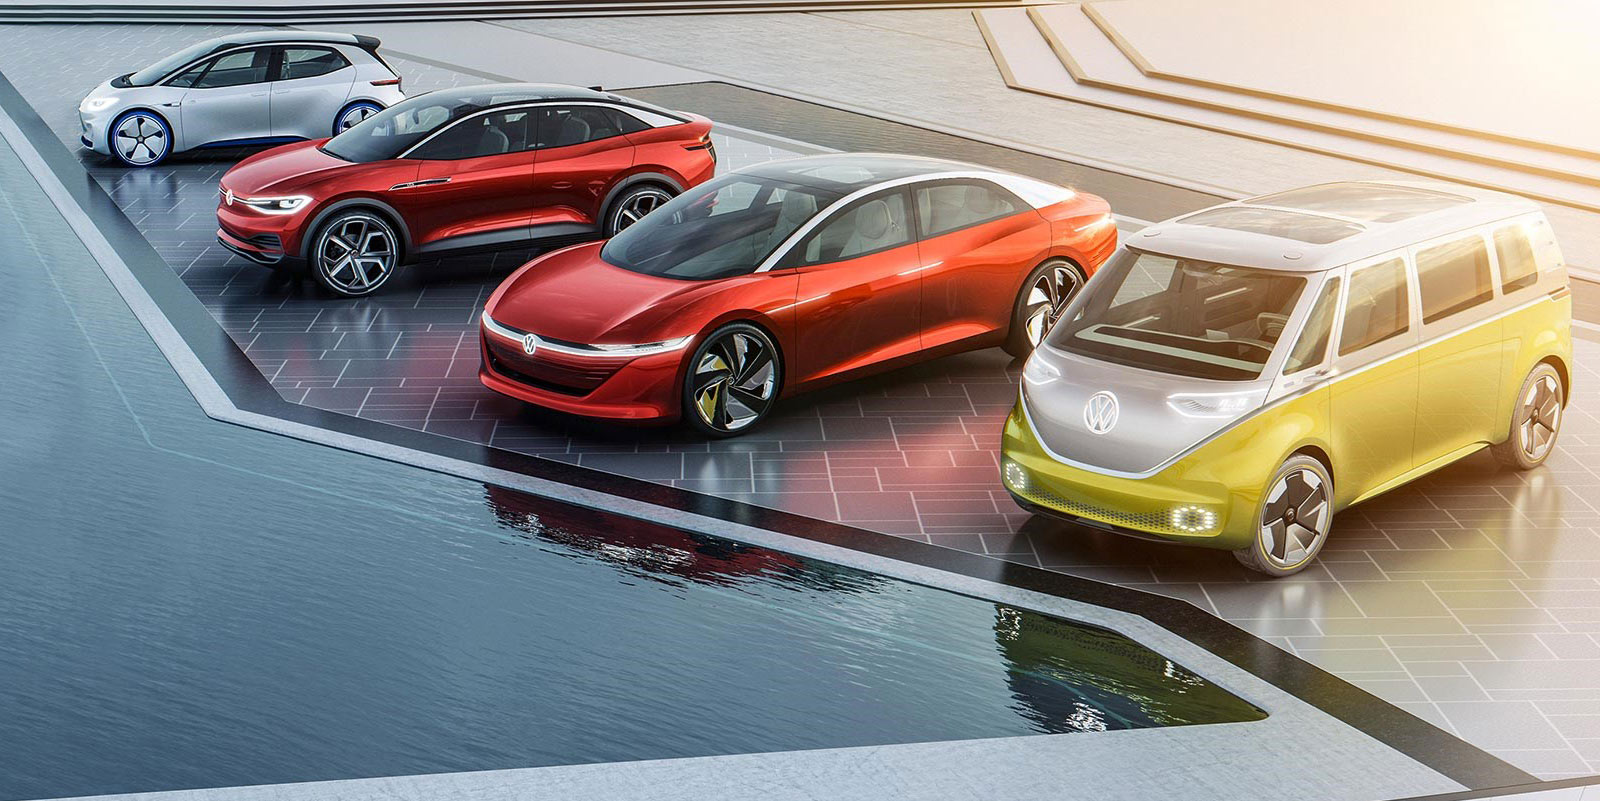 vw race tesla investments electric cars self driving